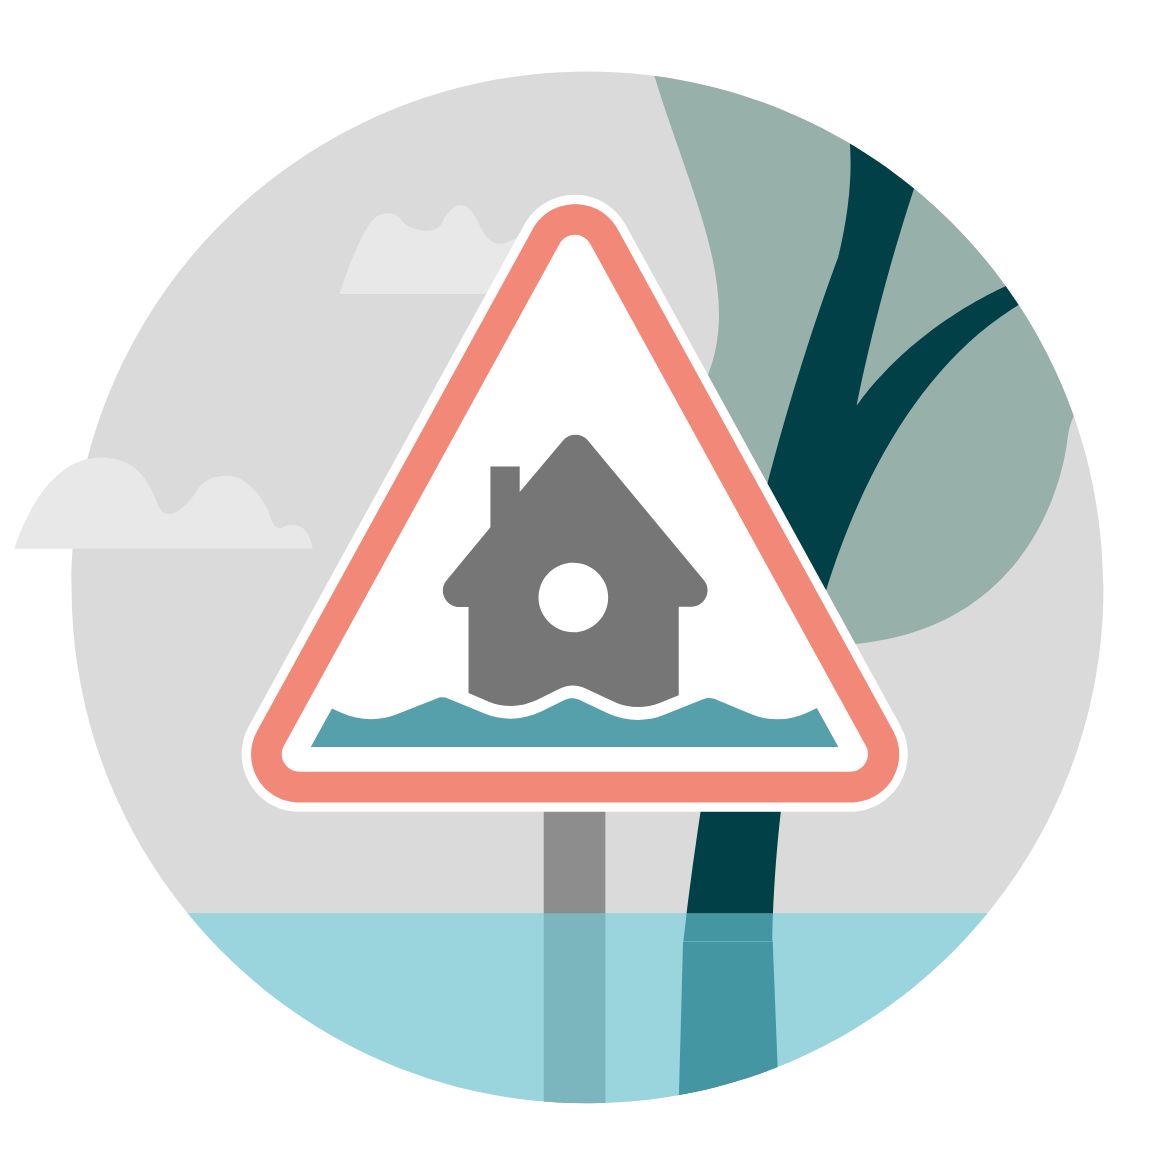 Illustration of a flood warning sign partially submerged by water